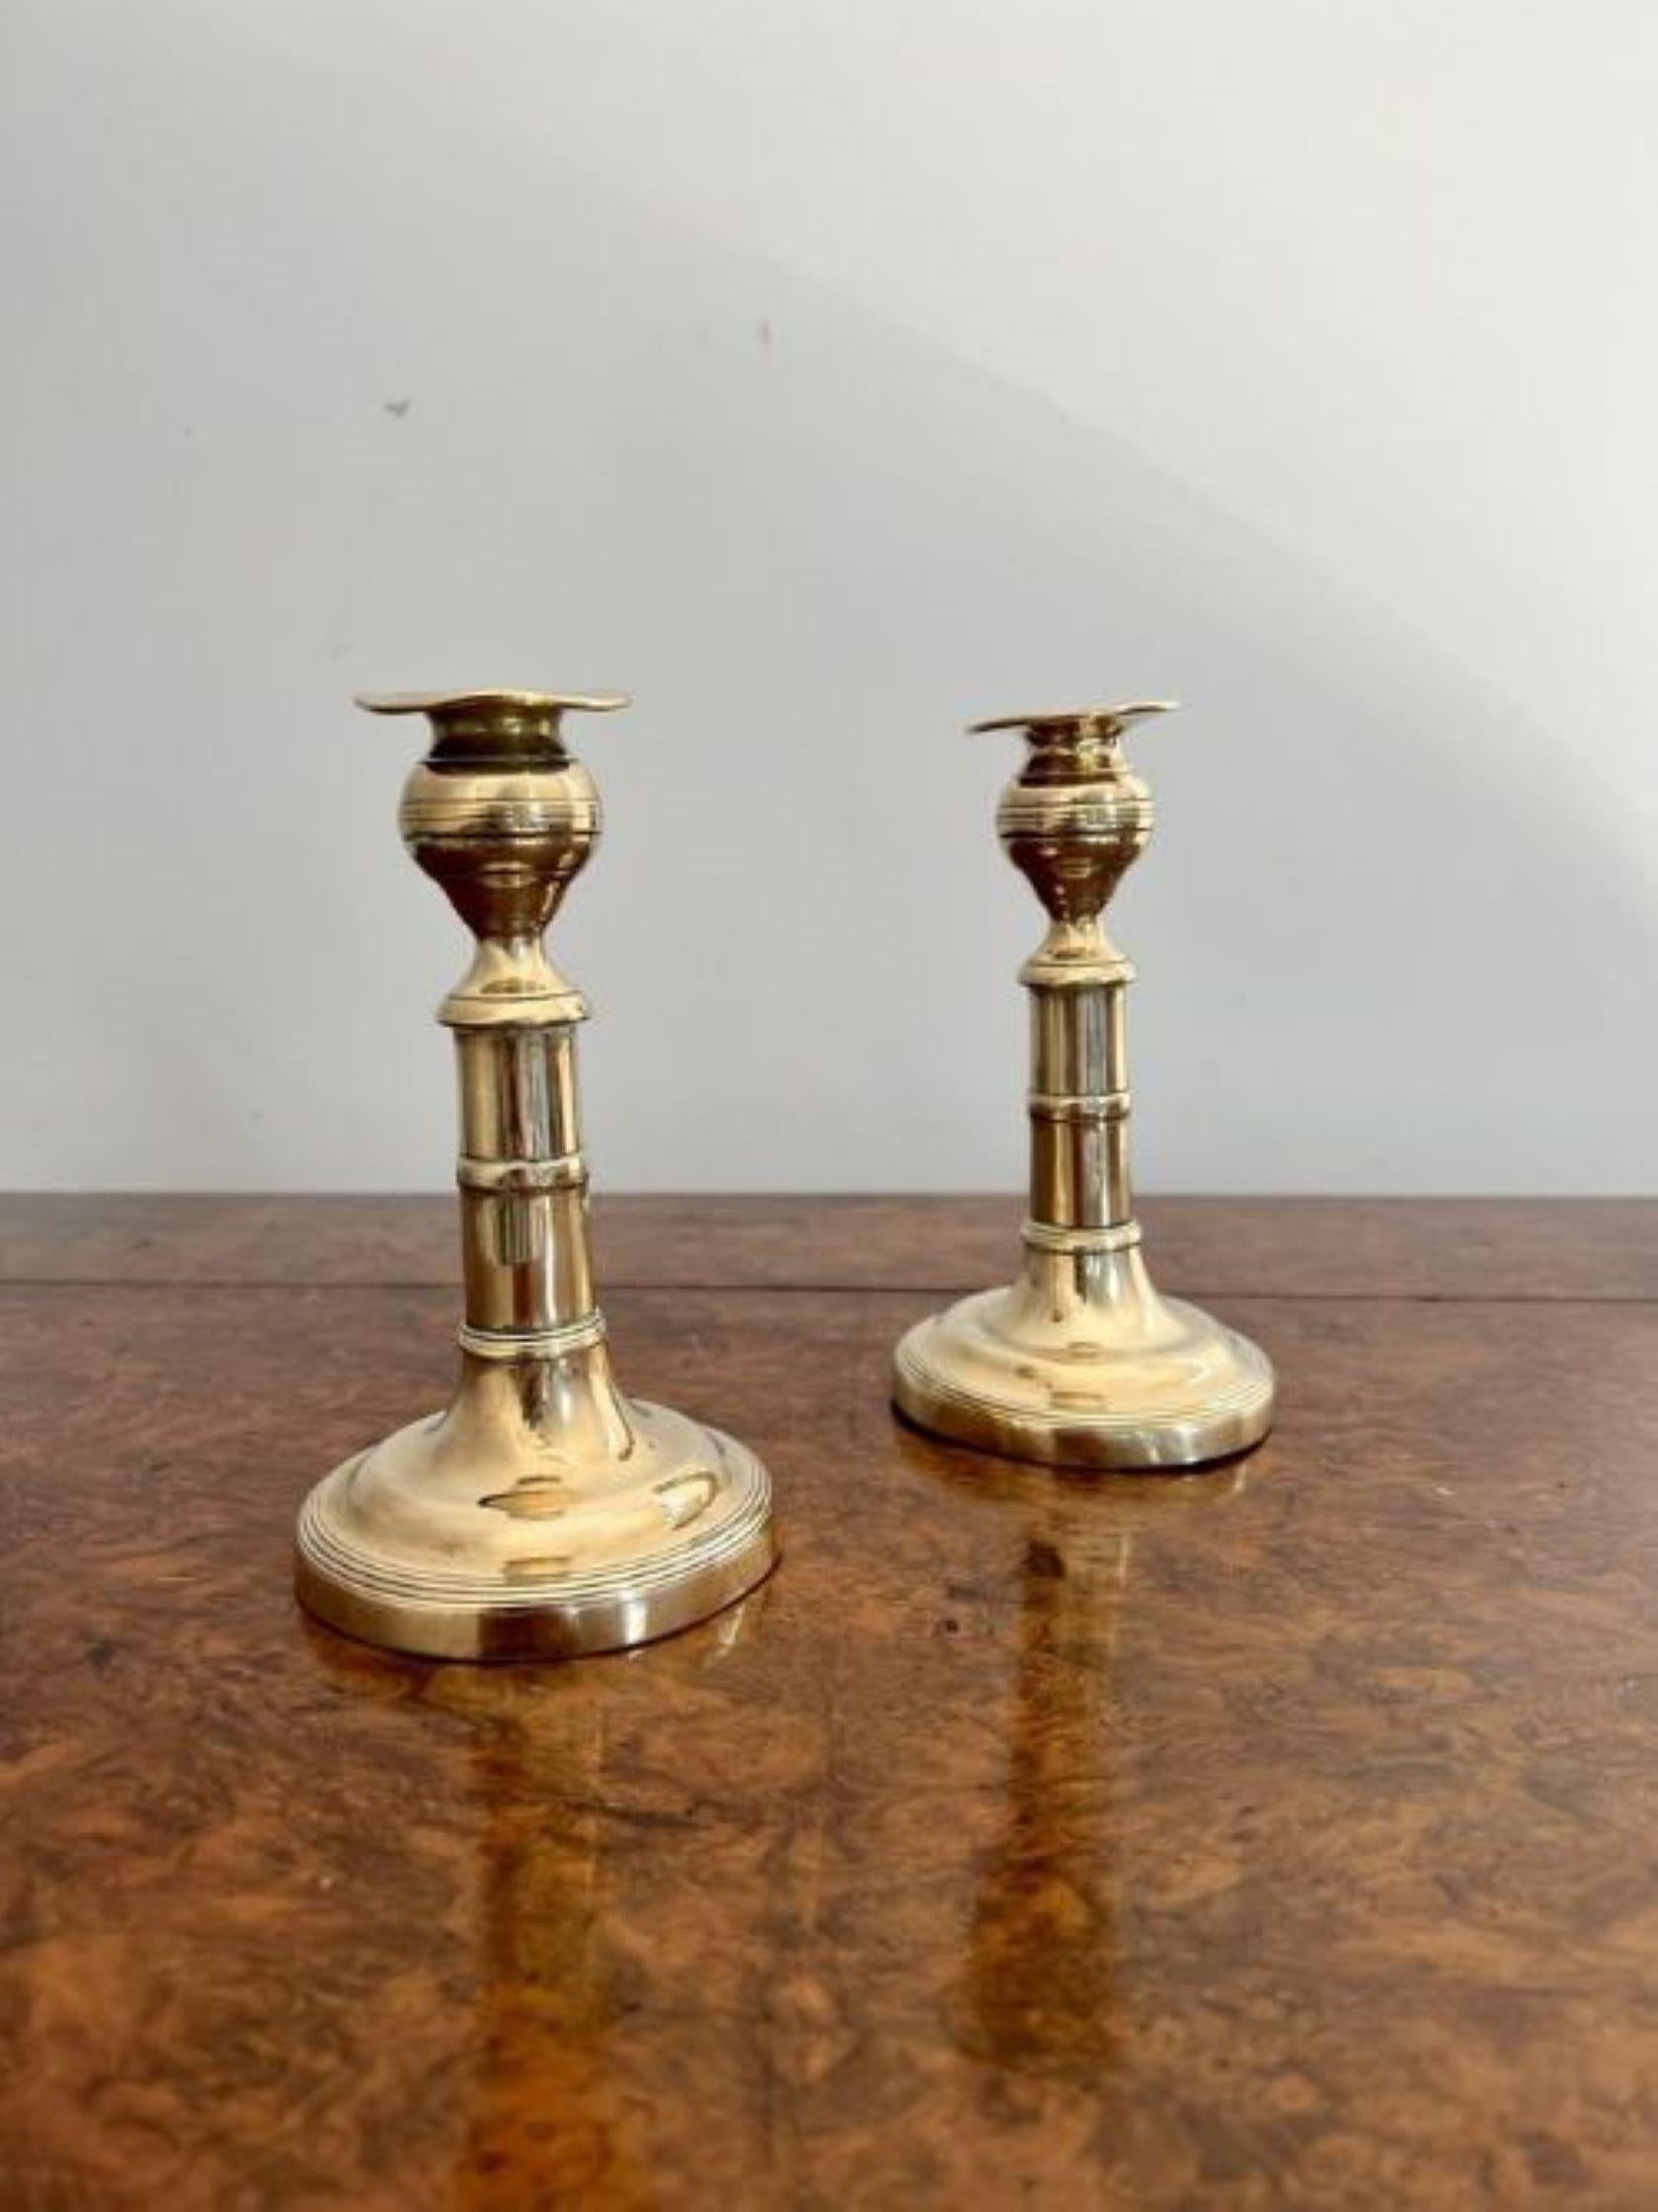 Pair of antique George III quality brass candlesticks having a turned column raised on a circular base.